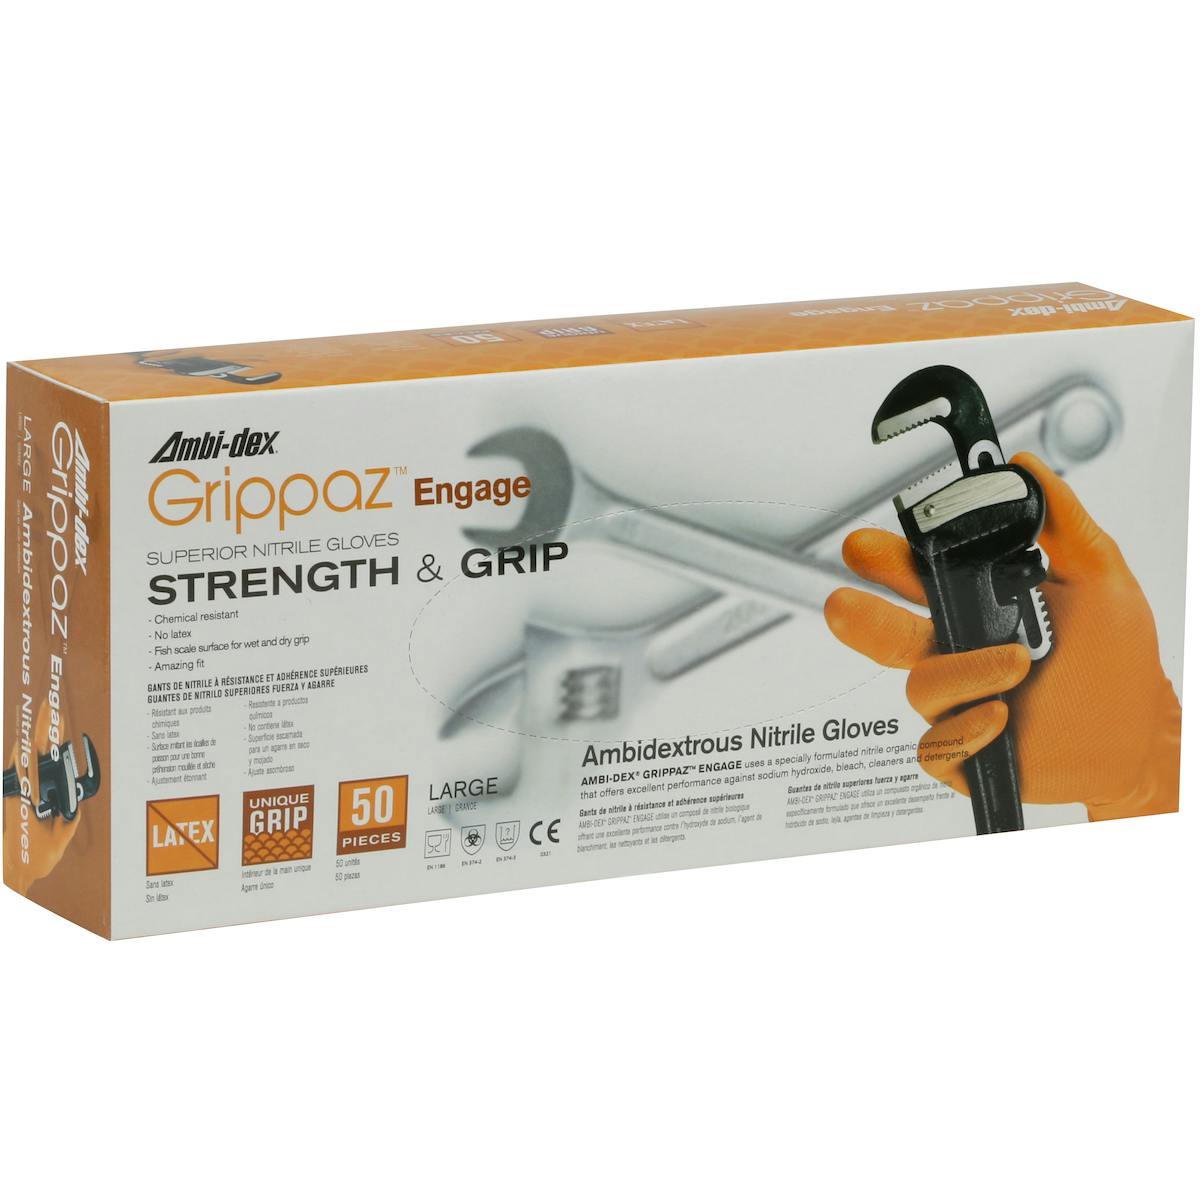 Grippaz™ Engage Extended Use Ambidextrous Nitrile Glove with Textured Fish Scale Grip - 7 Mil (67-307)_0